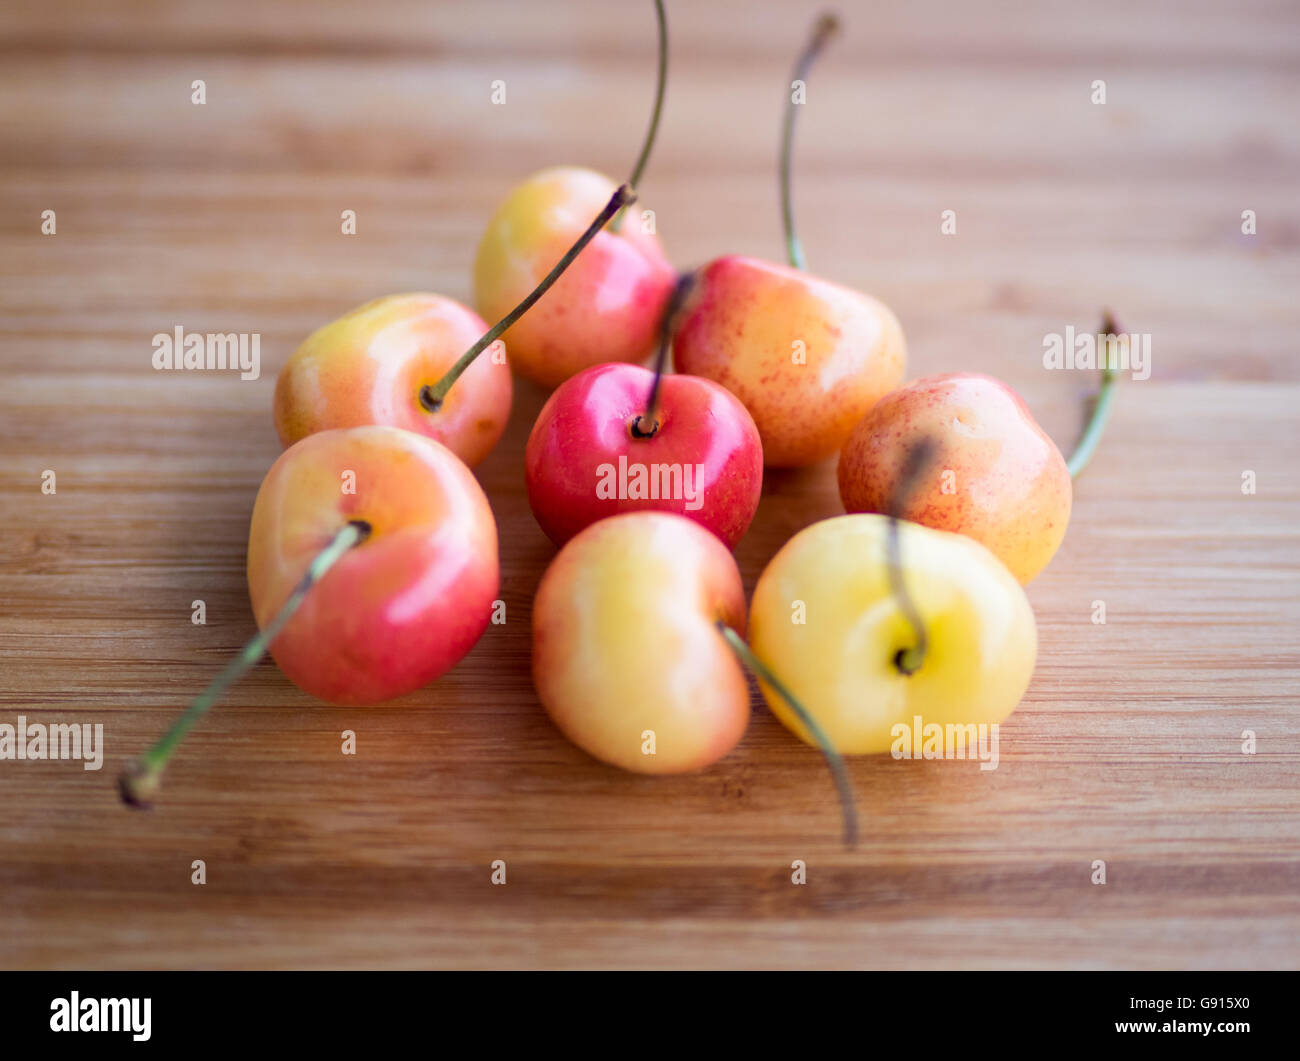 Beautiful, sweet, and delicious Rainier cherries on a bamboo cutting board. Stock Photo